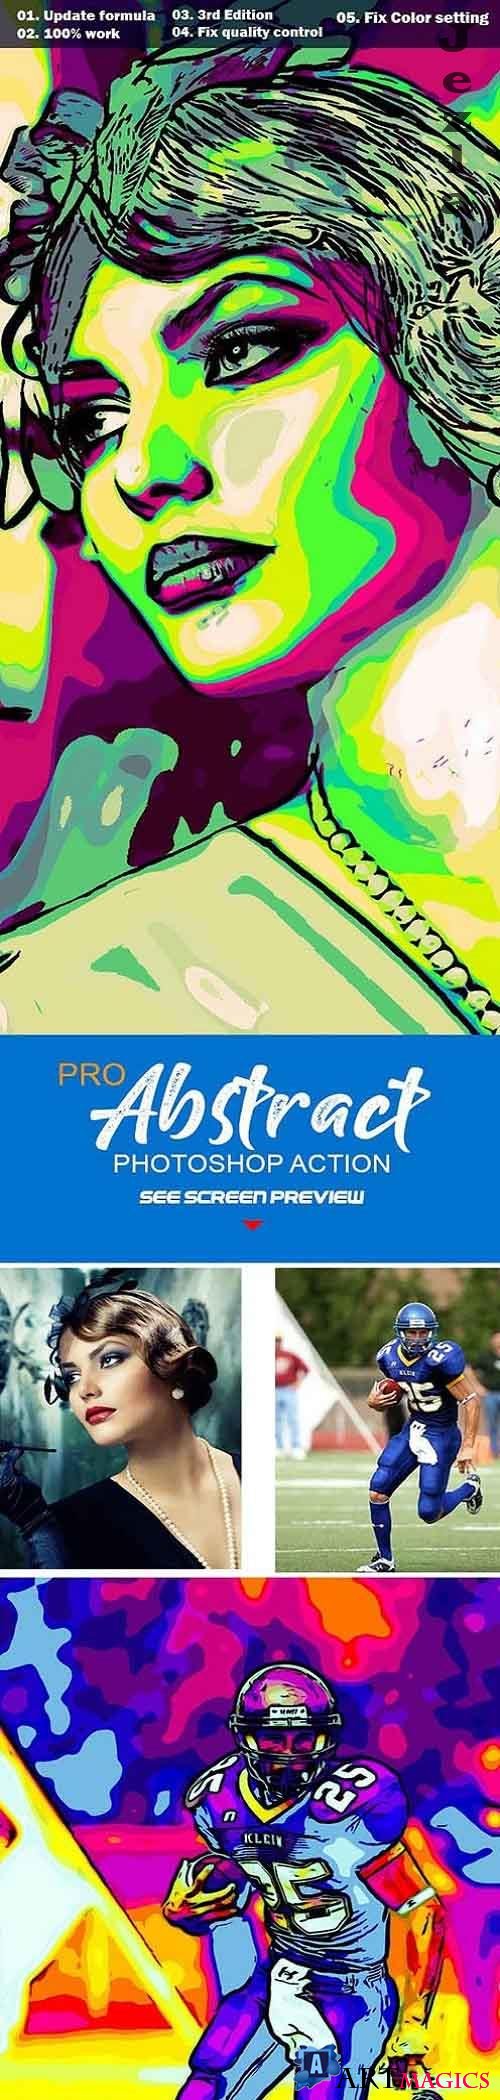 Pro Abstract Photoshop Action 27540213